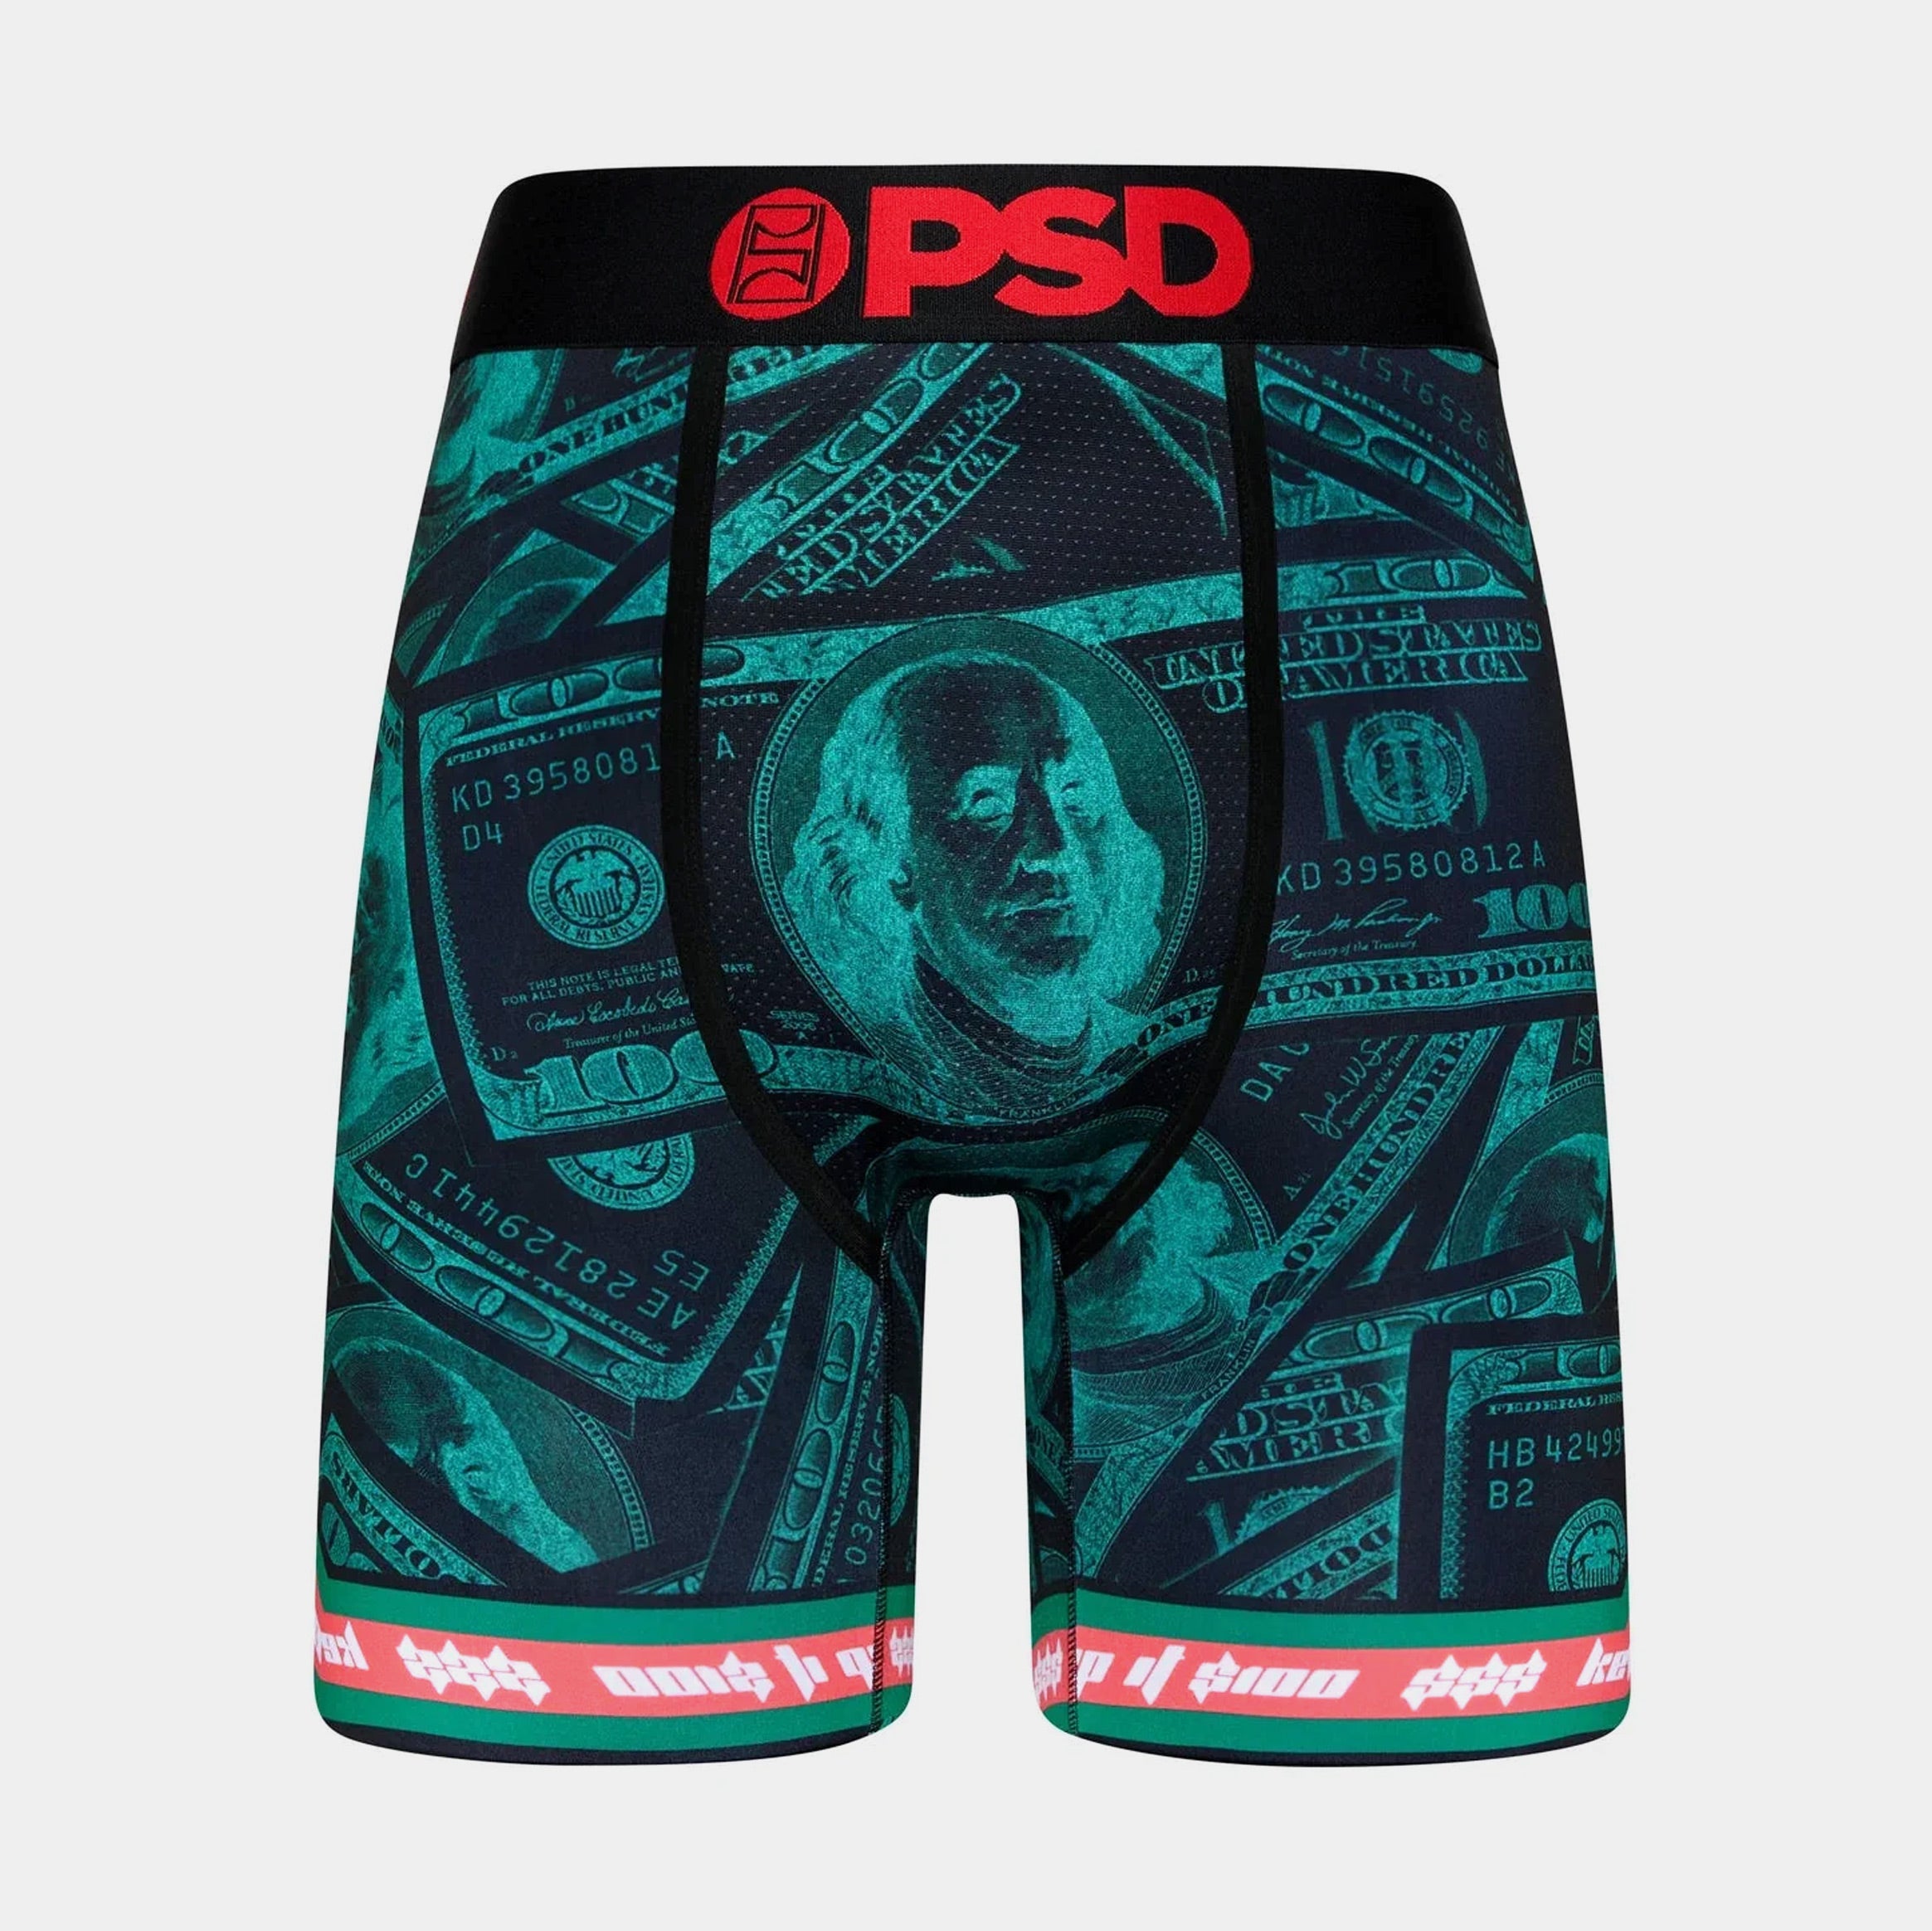 Psd Playboy Paisley Mens Boxer Black Red Free Shipping 123180002 – Shoe  Palace